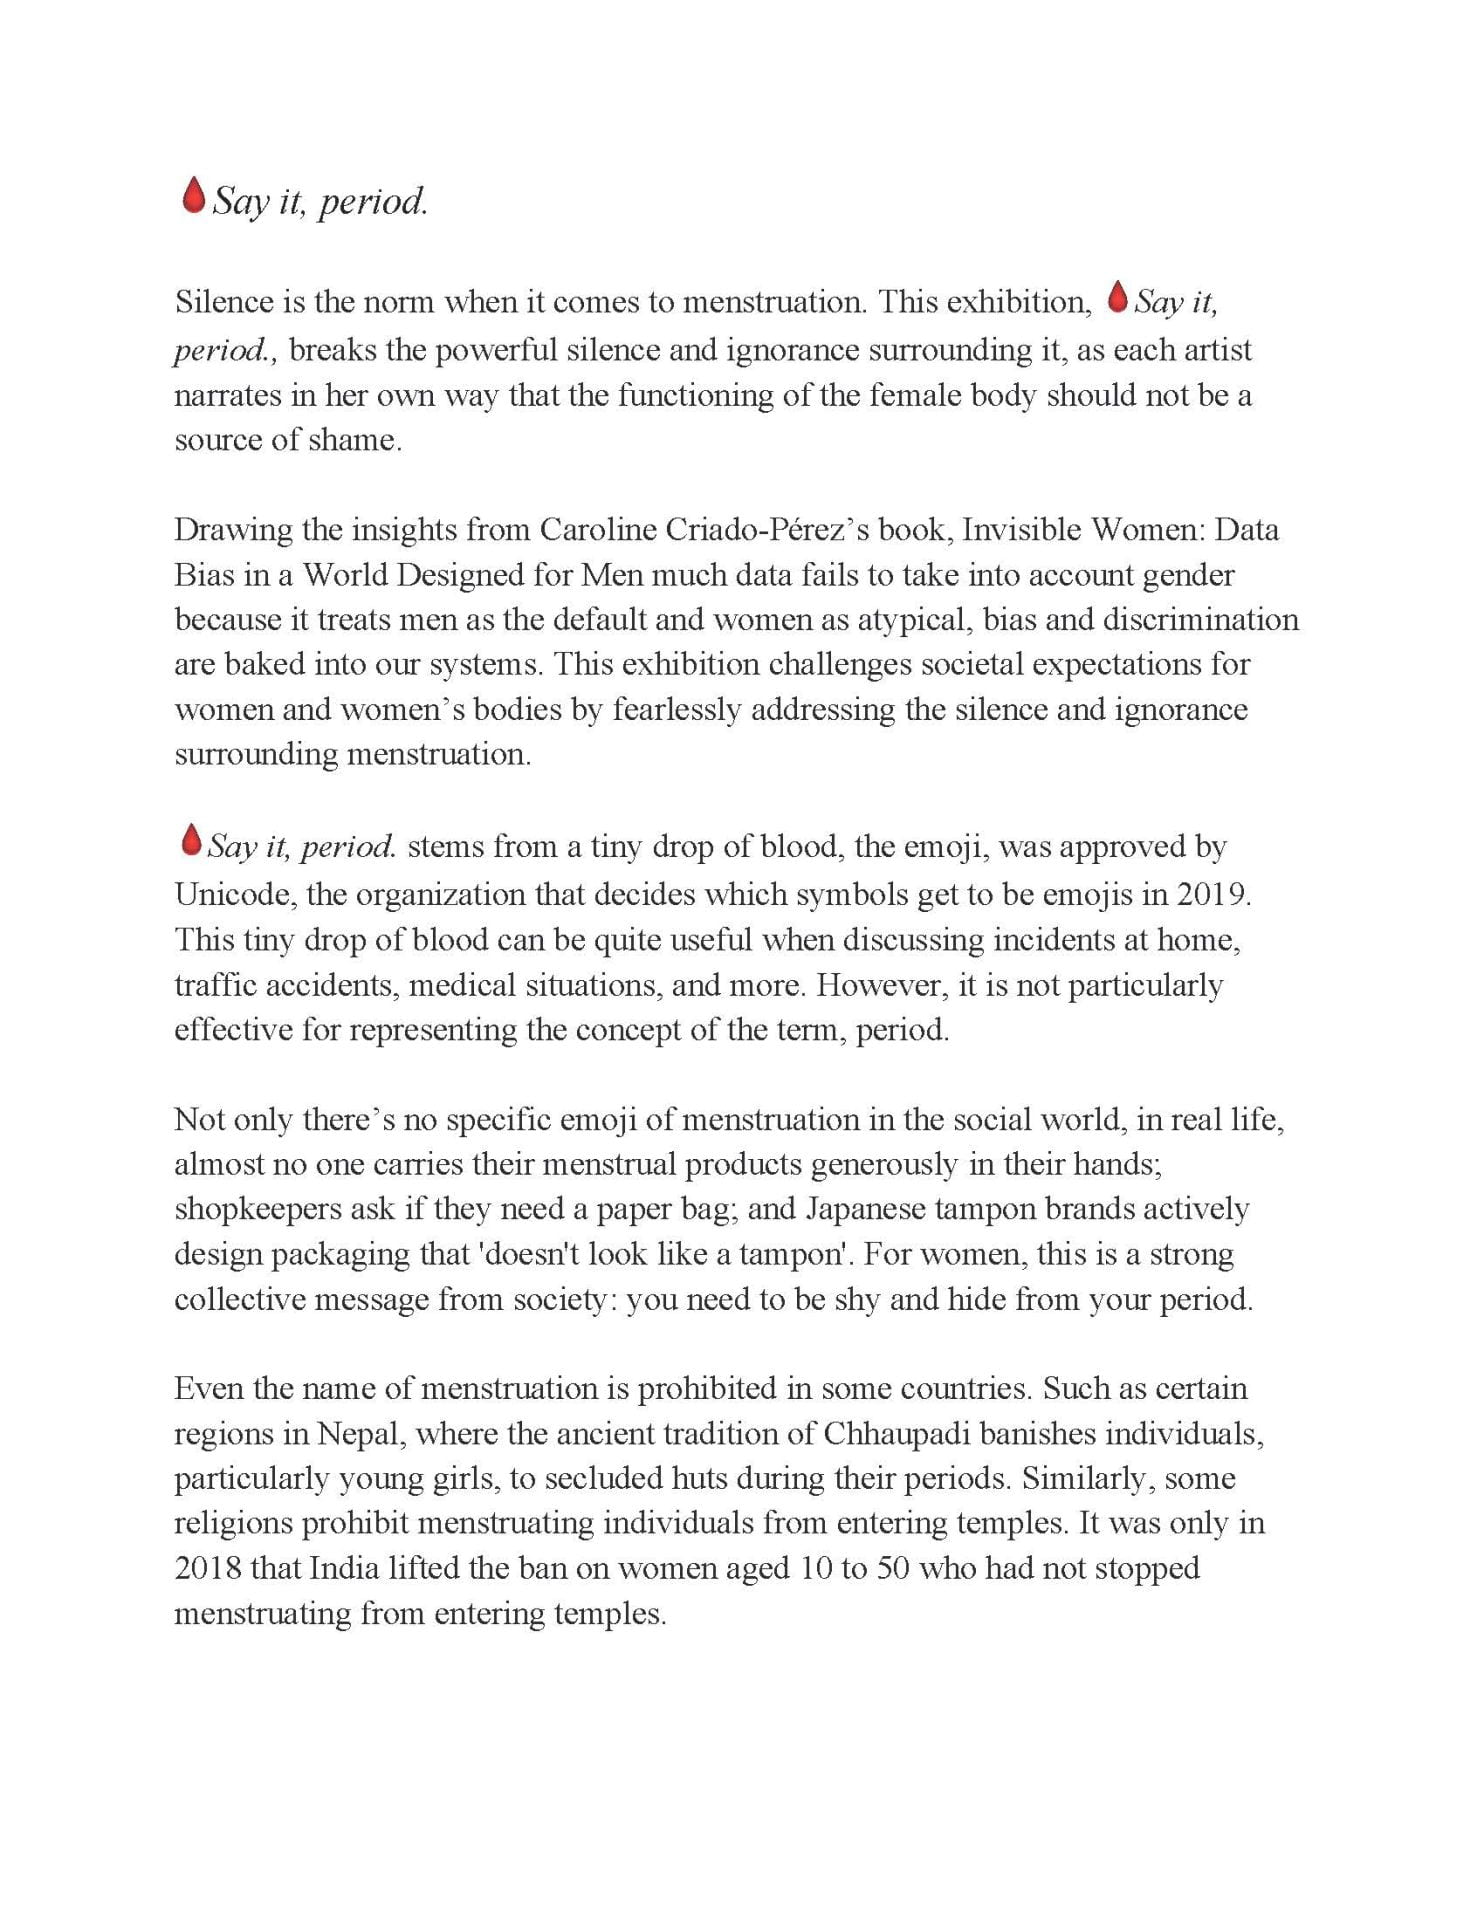 An image of the press release from 🩸Say it, period., 2023